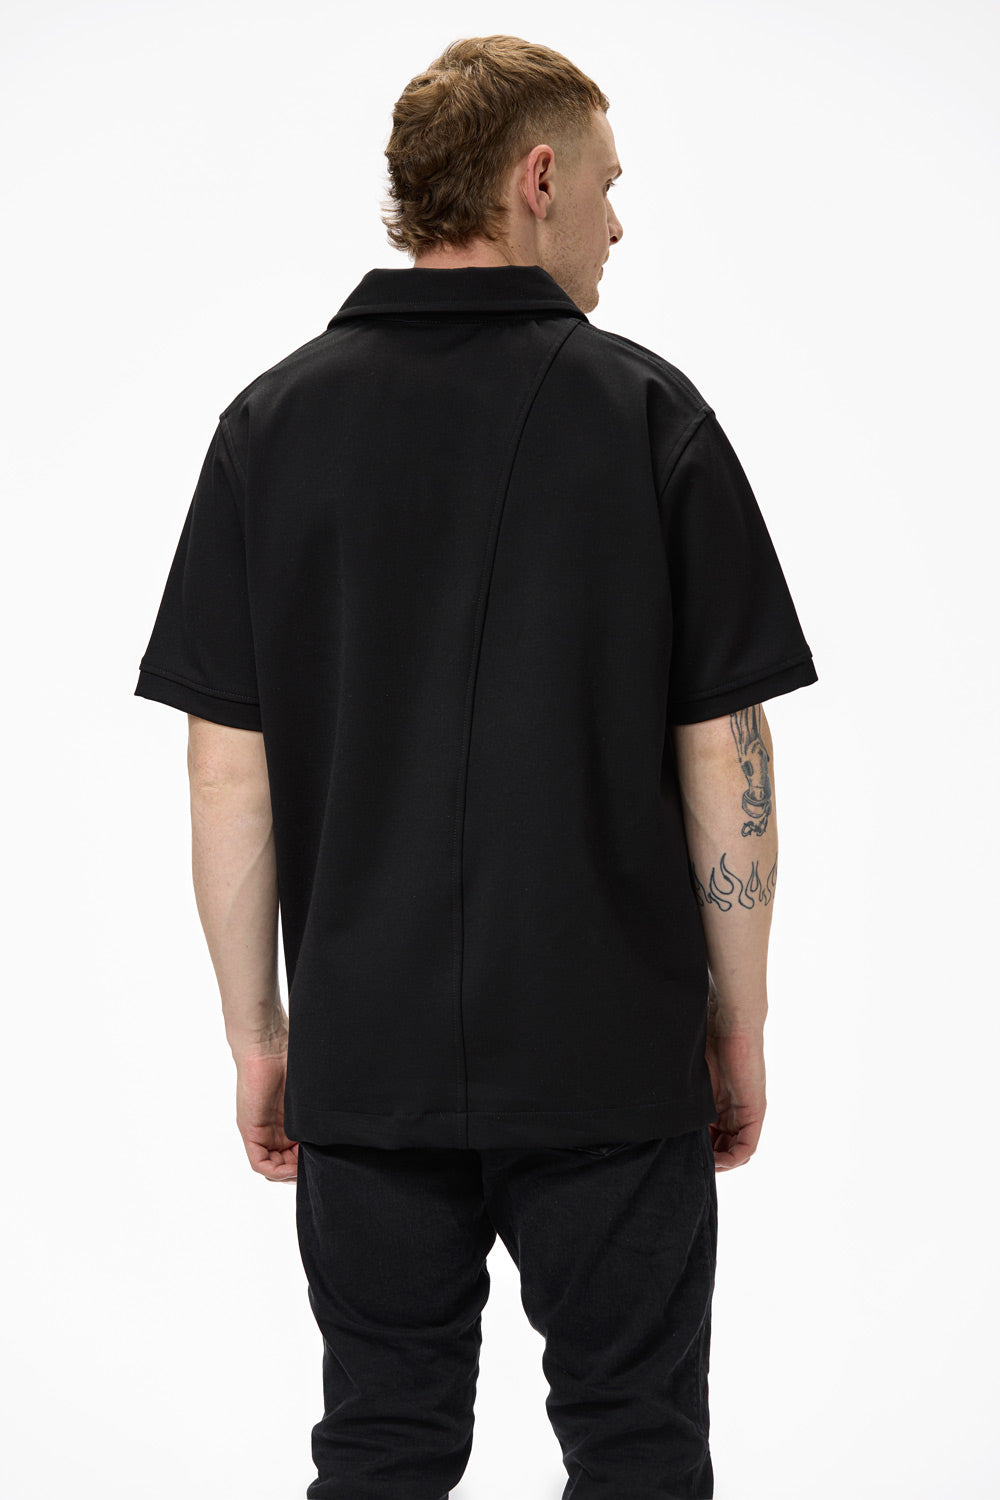 Polo embroidered black t-shirt